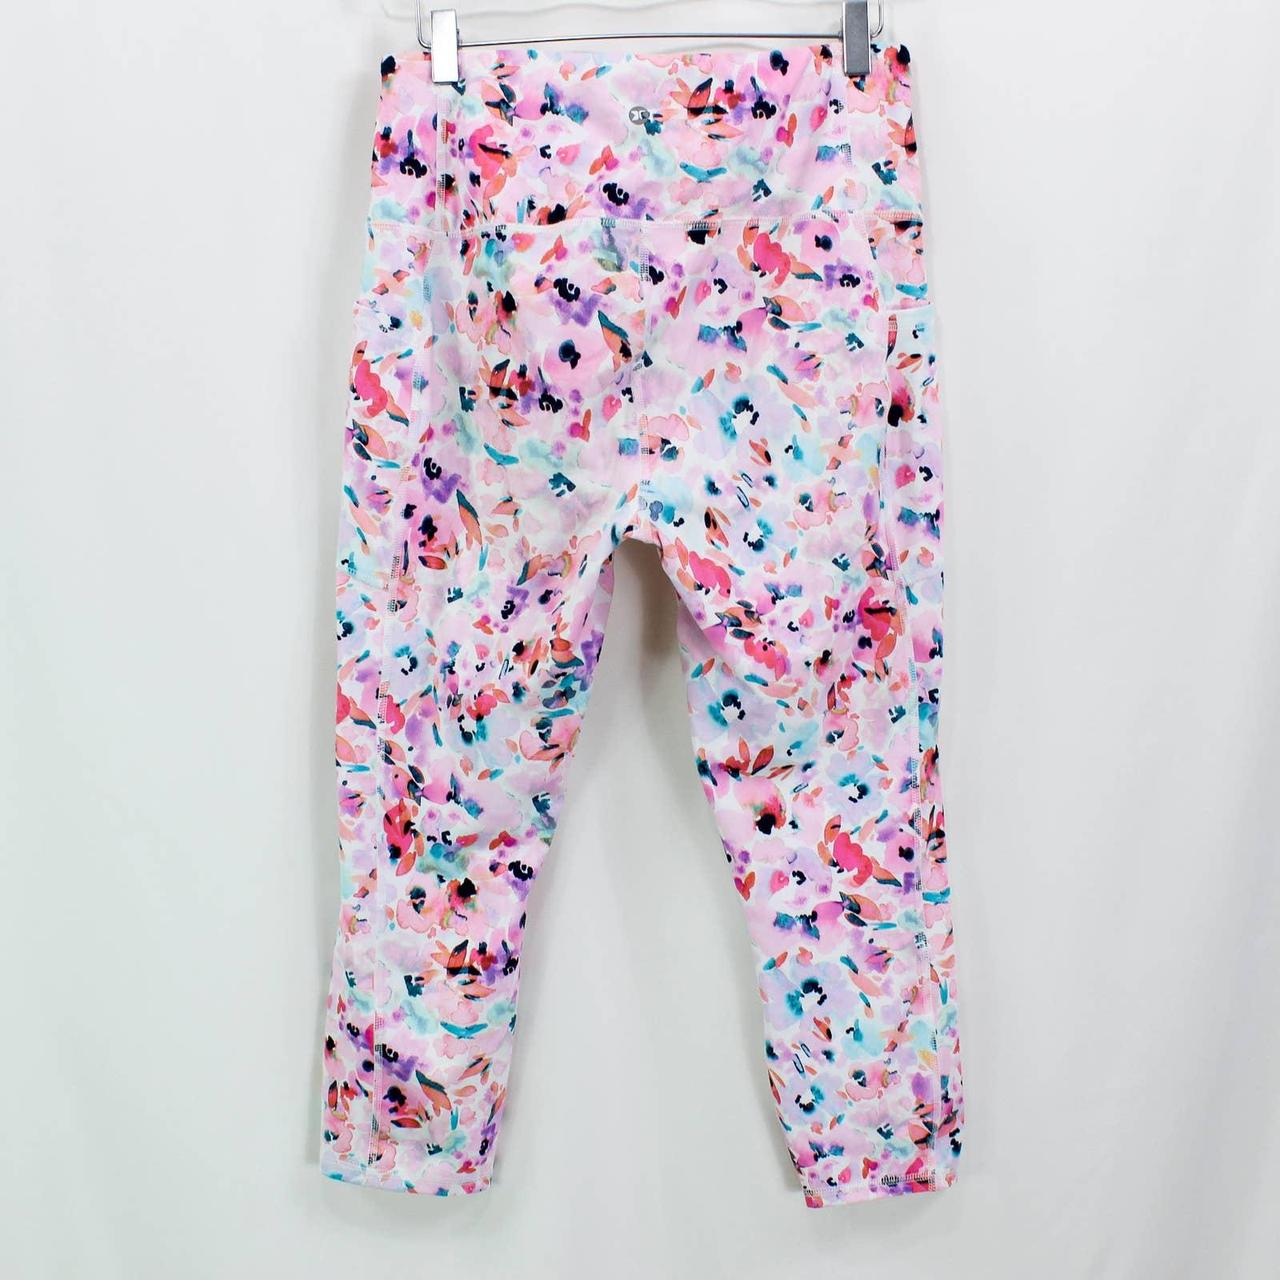 RBX Yoga pants/leggings white with abstract floral - Depop